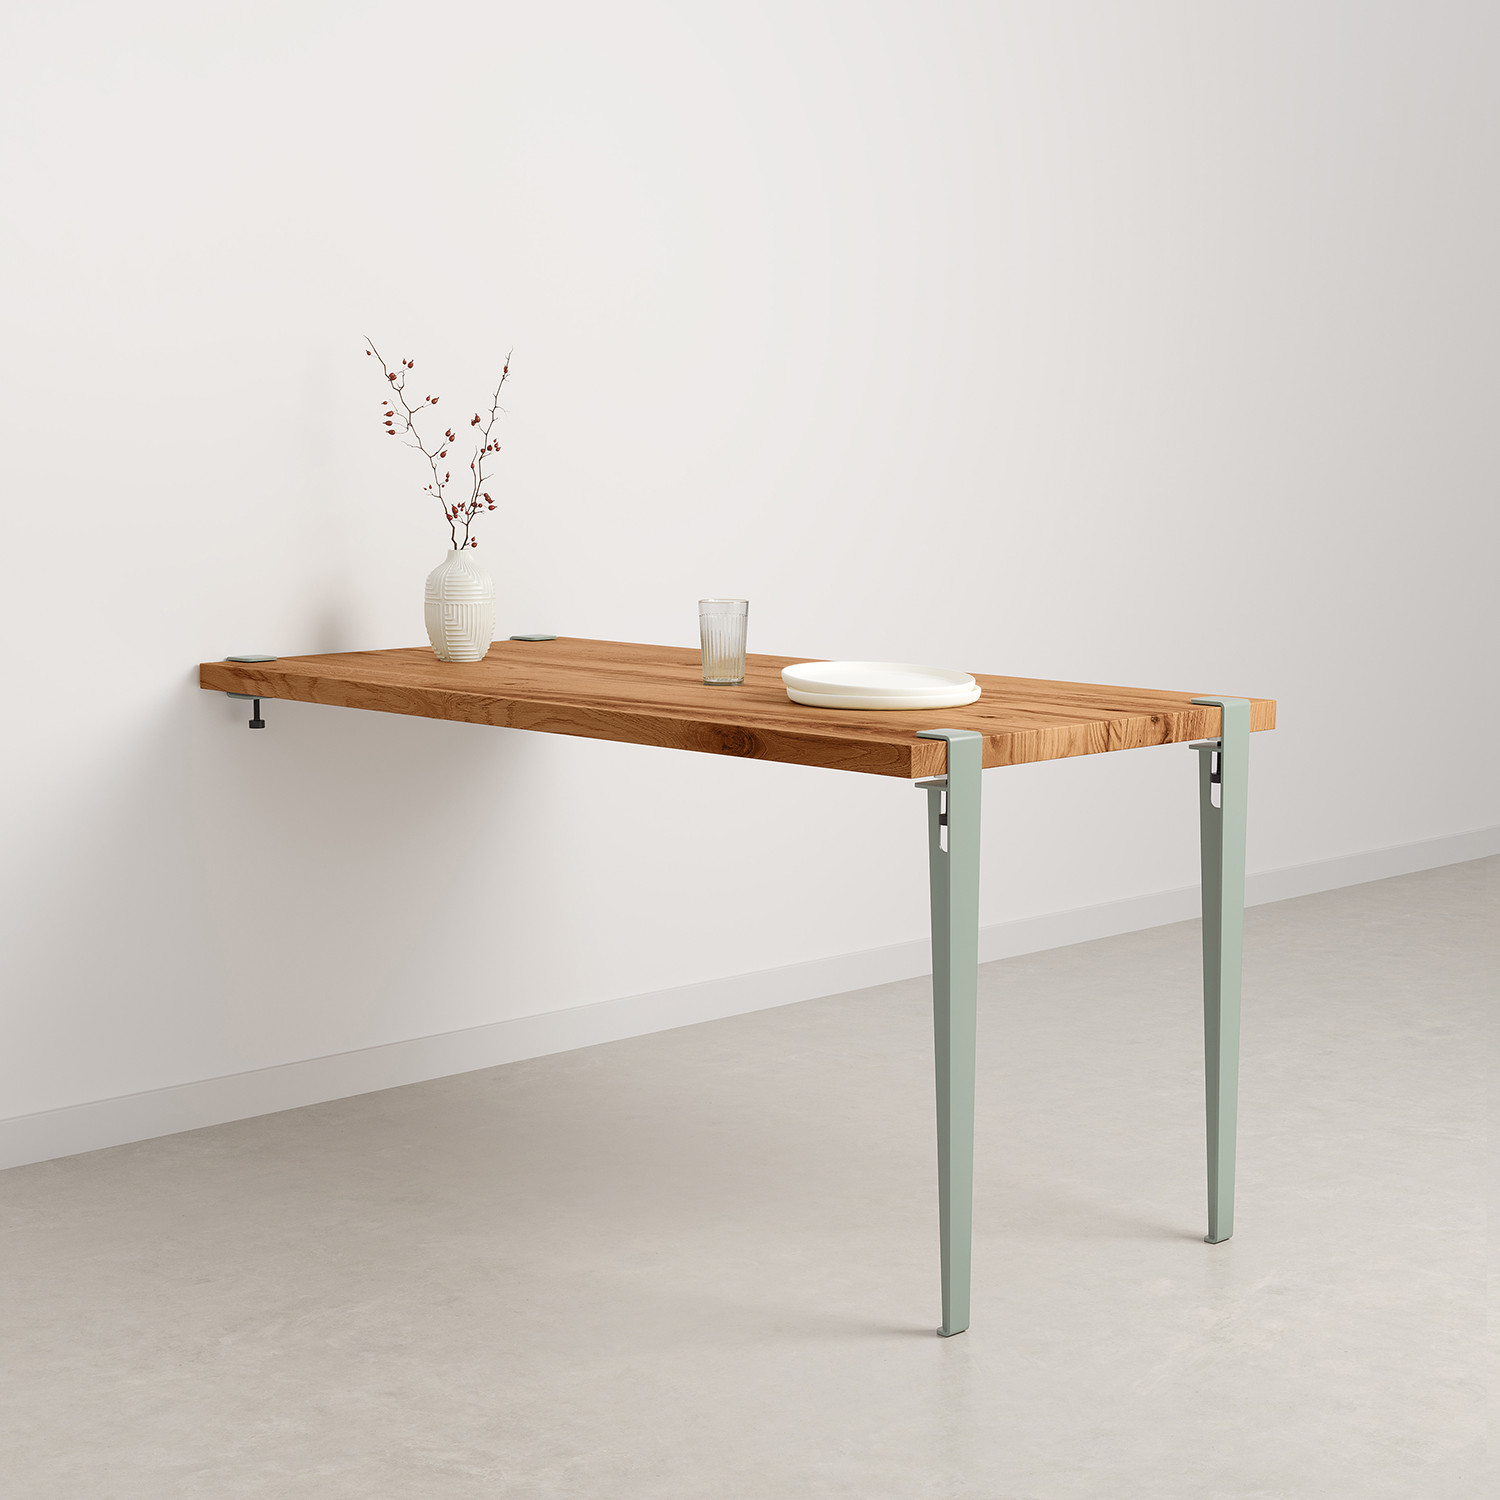 Wall–mounted dining table – height 75cm - reclaimed wood